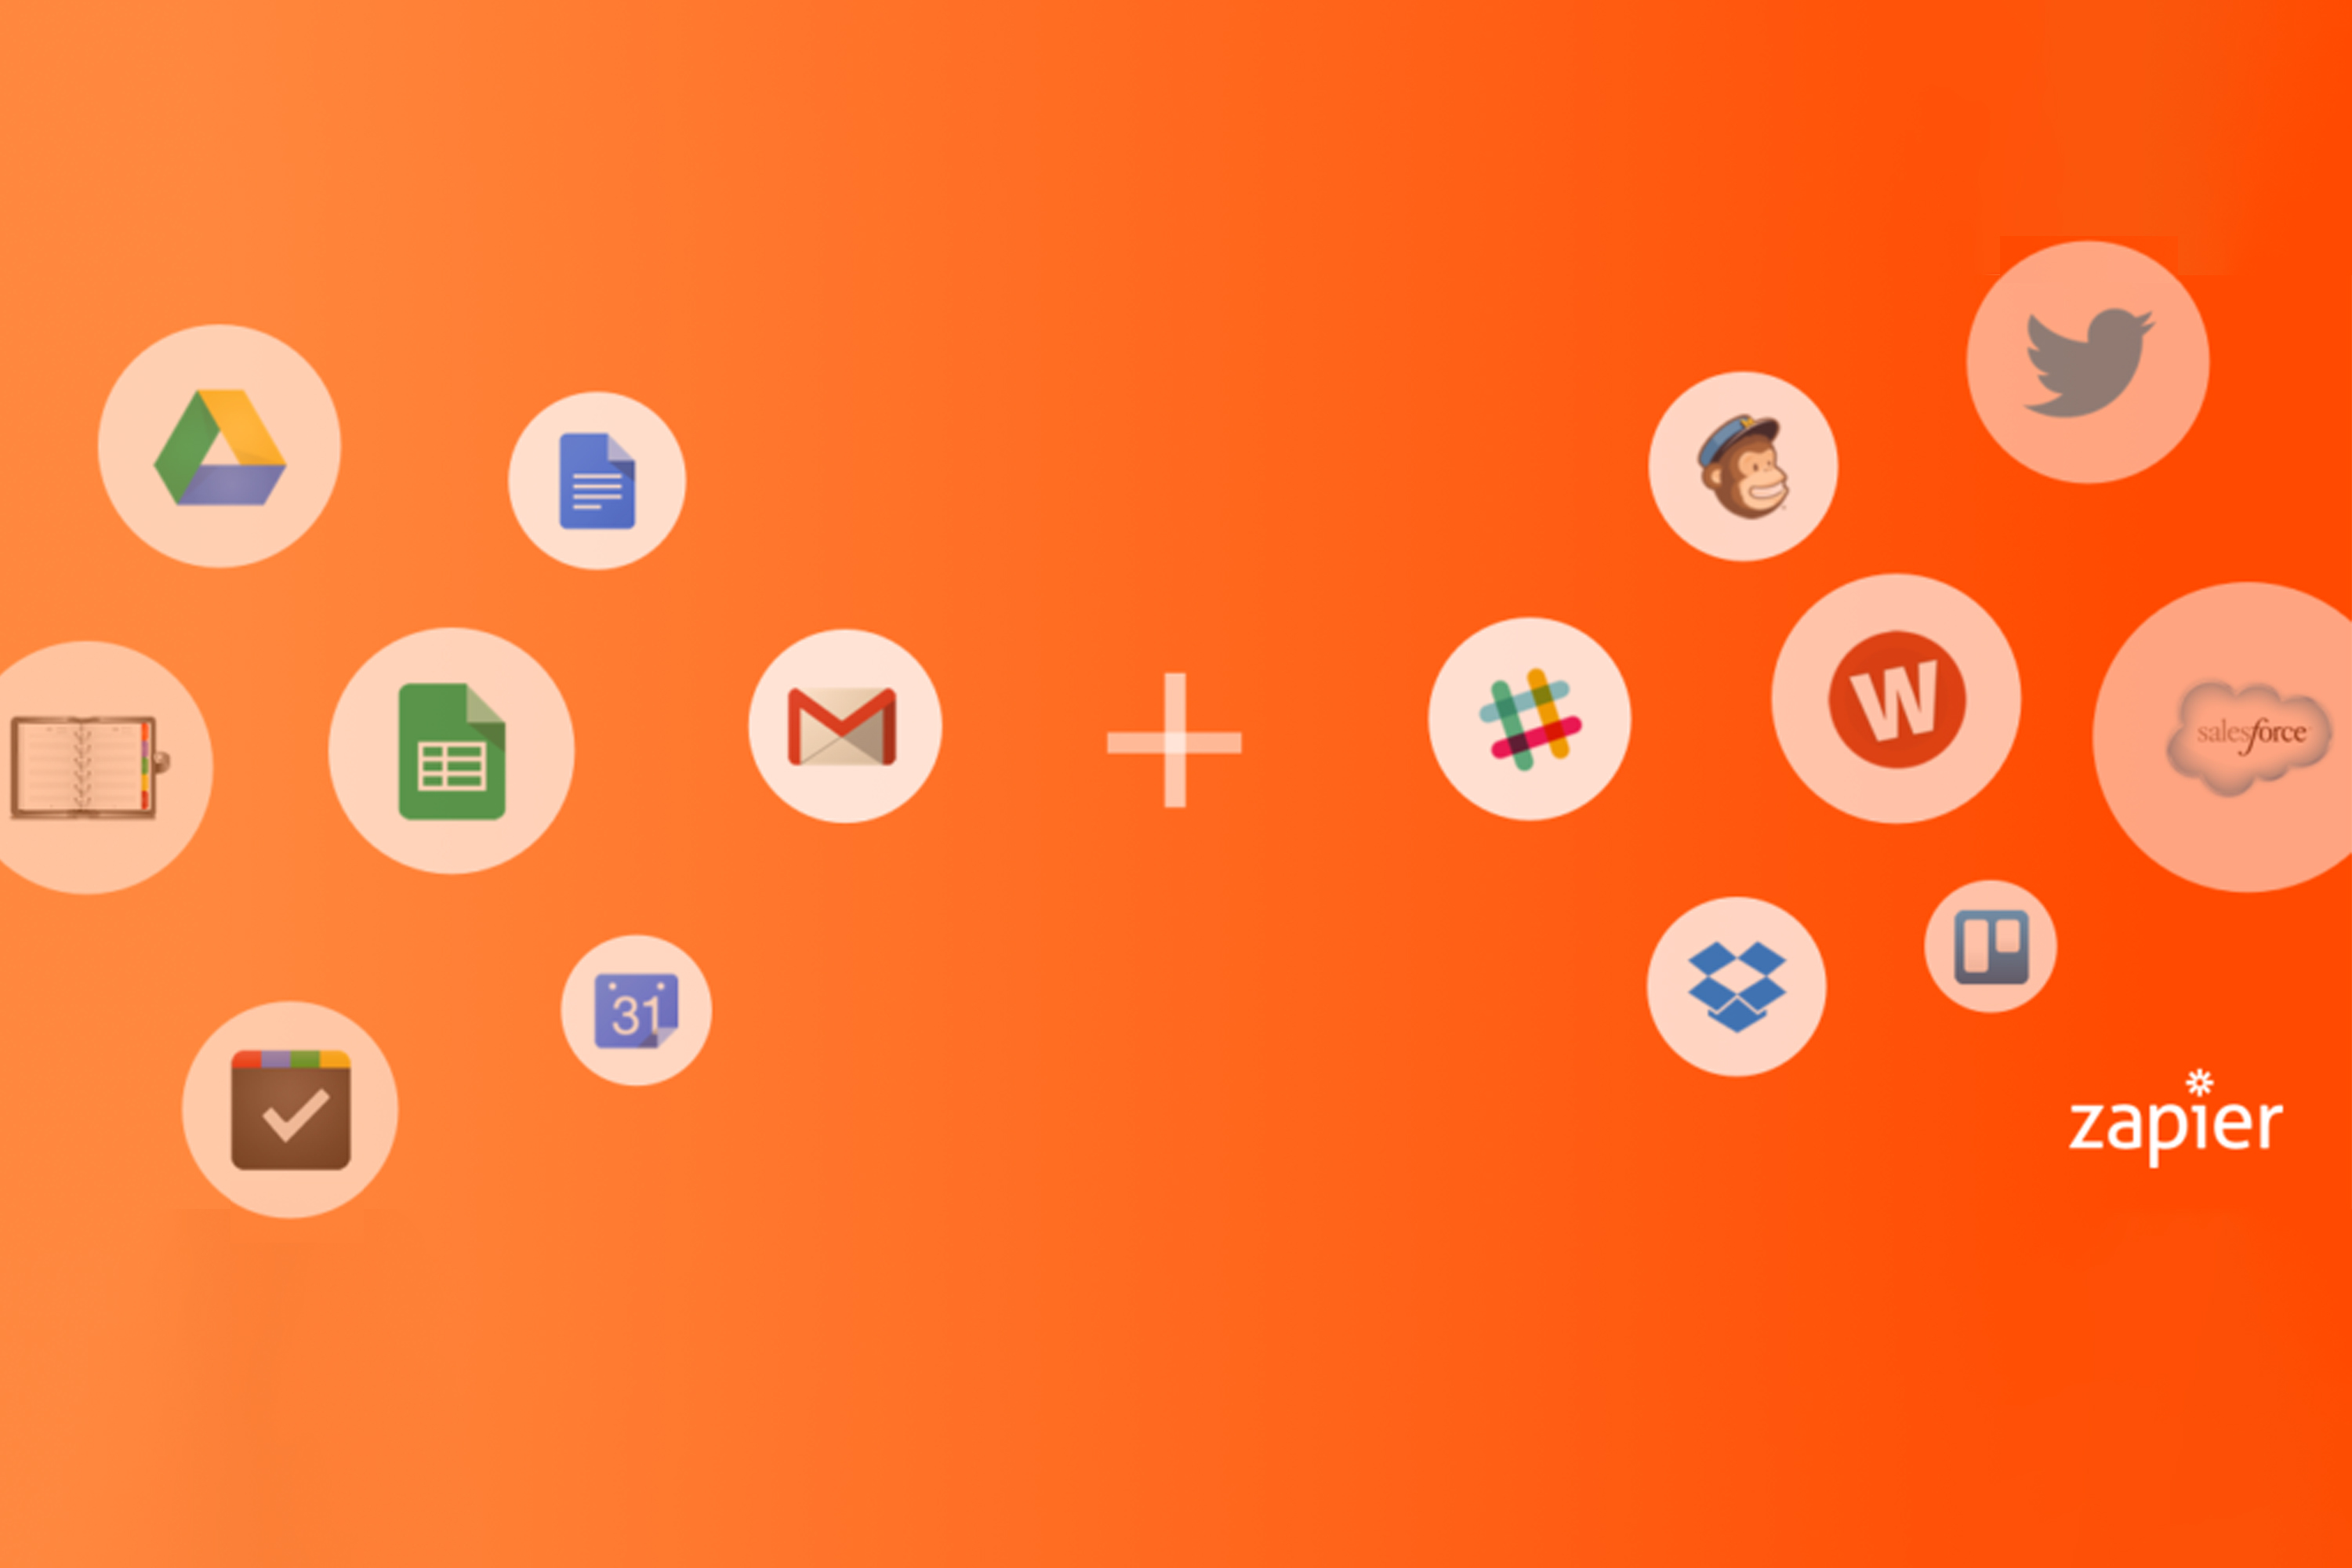 Introducing the Sapeum Zapier integration to automate your day-to-day research and note-taking tasks, and build workflows between services that otherwise wouldn't be possible—for instance, sending support tickets from Zendesk to Sapeum